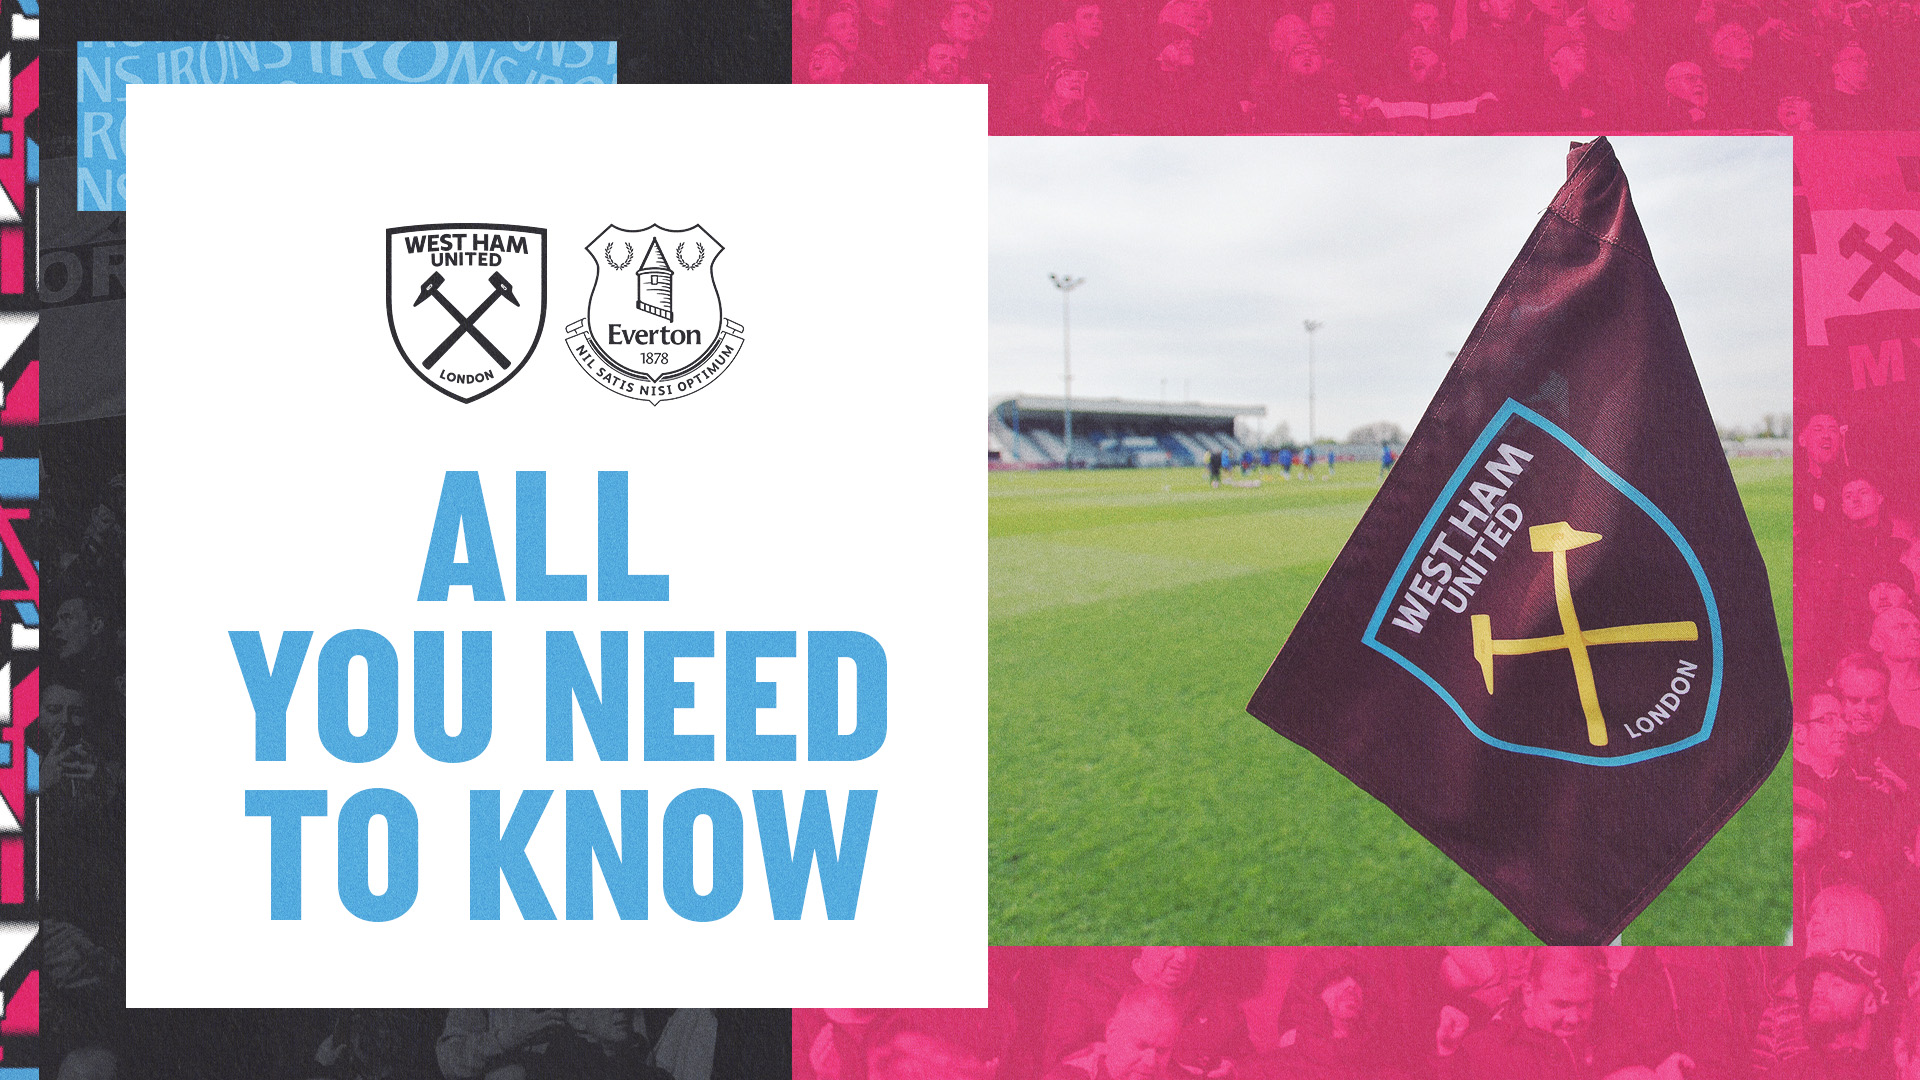 West Ham United U21s v Everton U21s - All You Need To Know